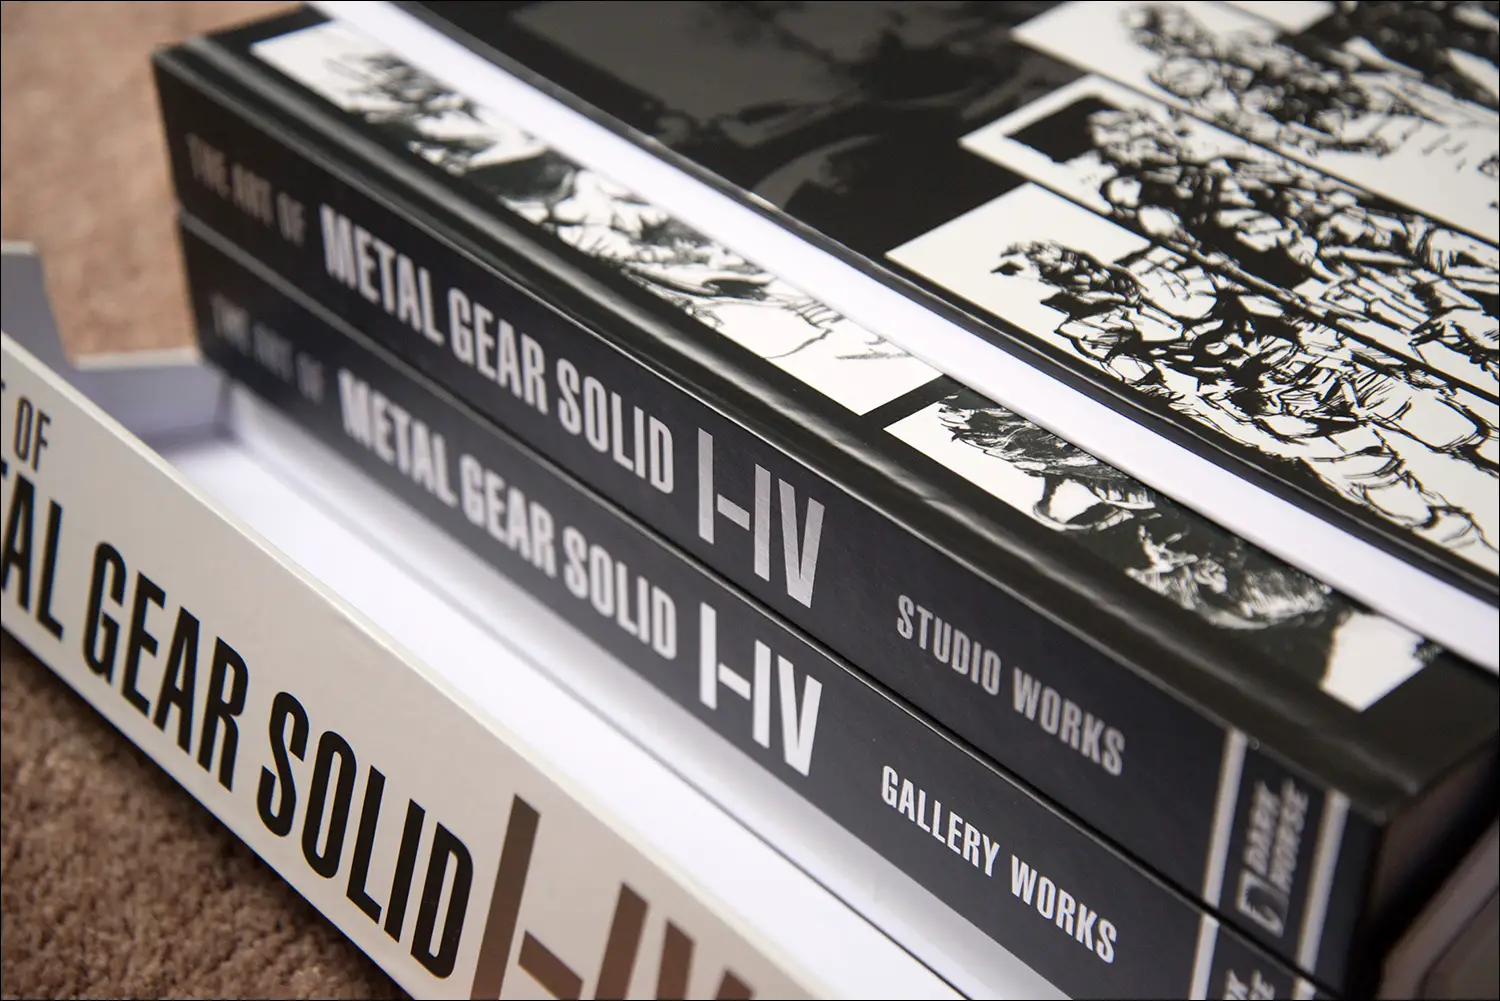 THE ART OF METAL GEAR SOLID Ⅰ-Ⅳ